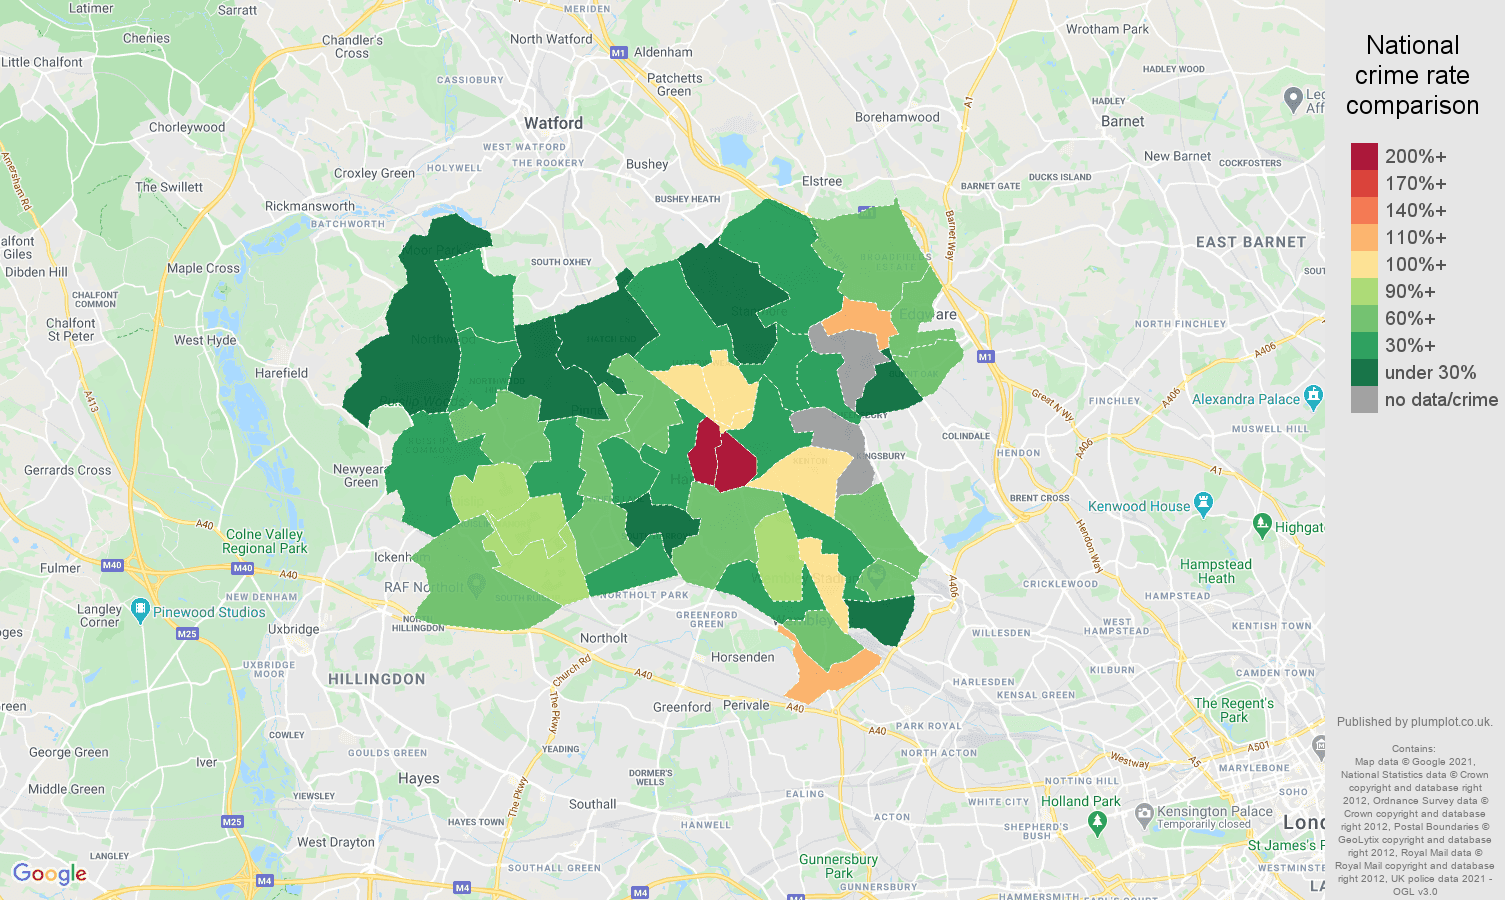 Harrow bicycle theft crime rate comparison map